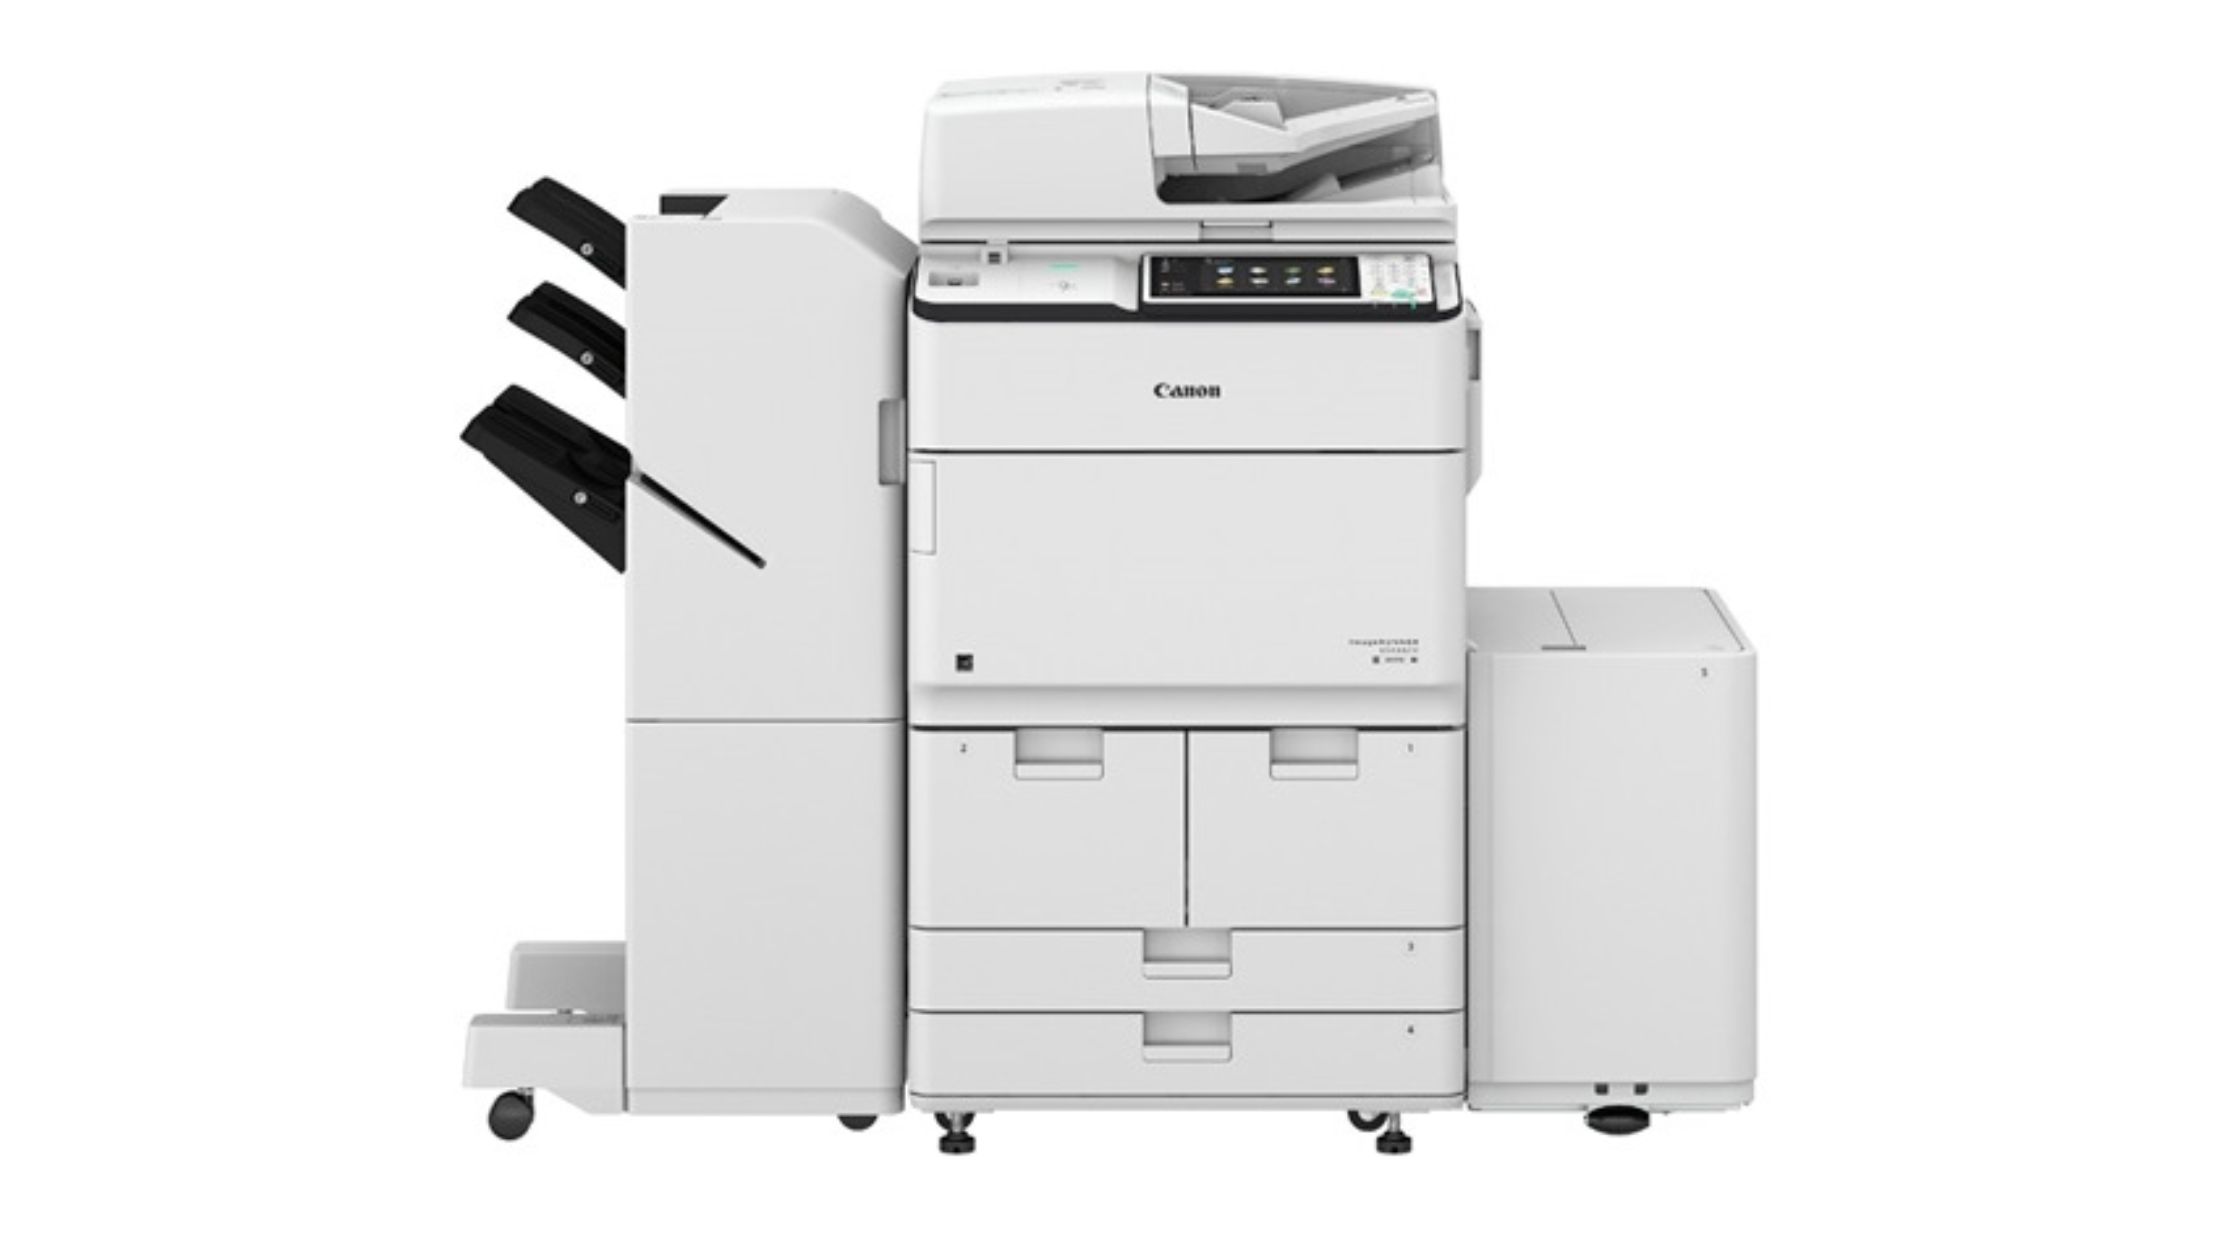 Simplifying Office Operations With Canon Printer For Lease In Ny | TheAmberPost